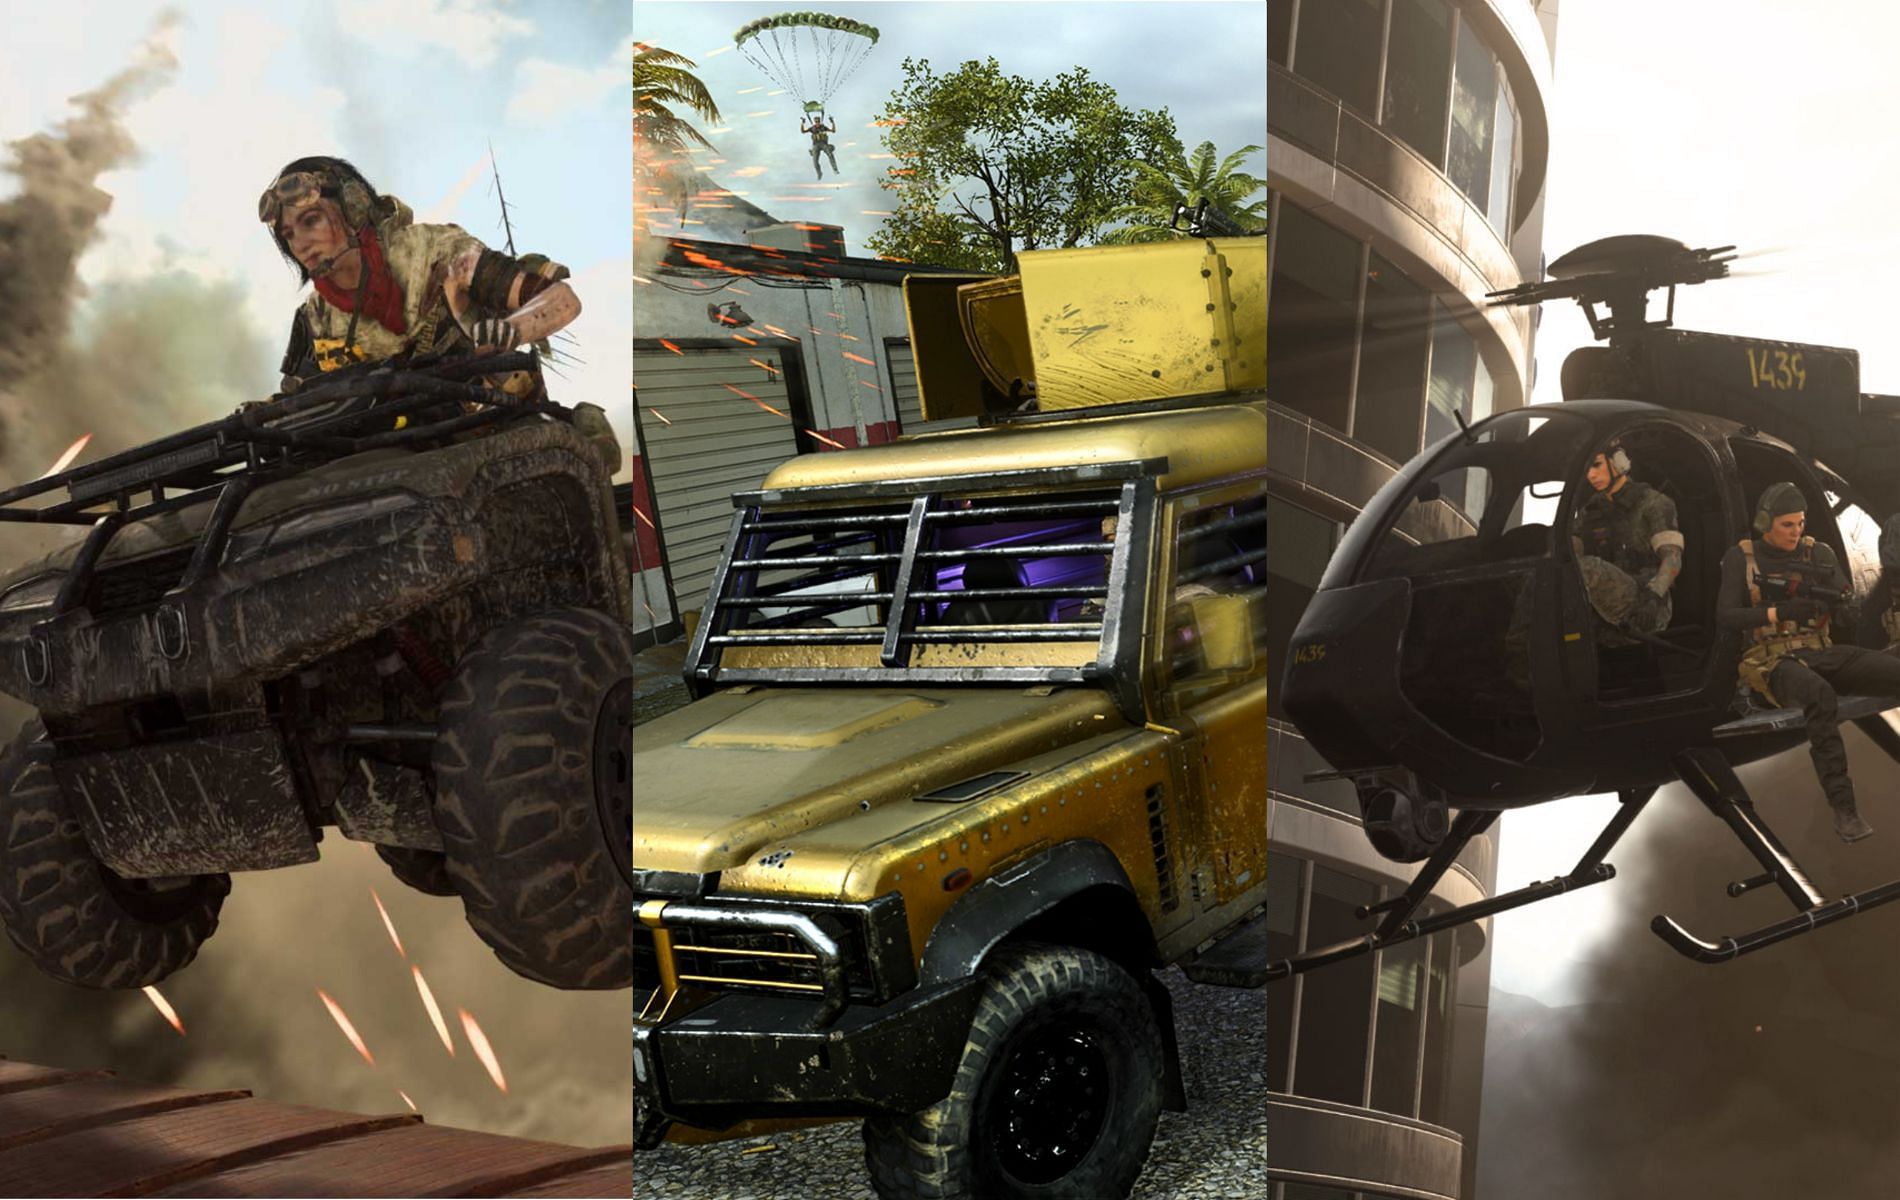 Warzone 2 will feature both new and old vehicles (Image via Activision/Edited by Sportskeeda)